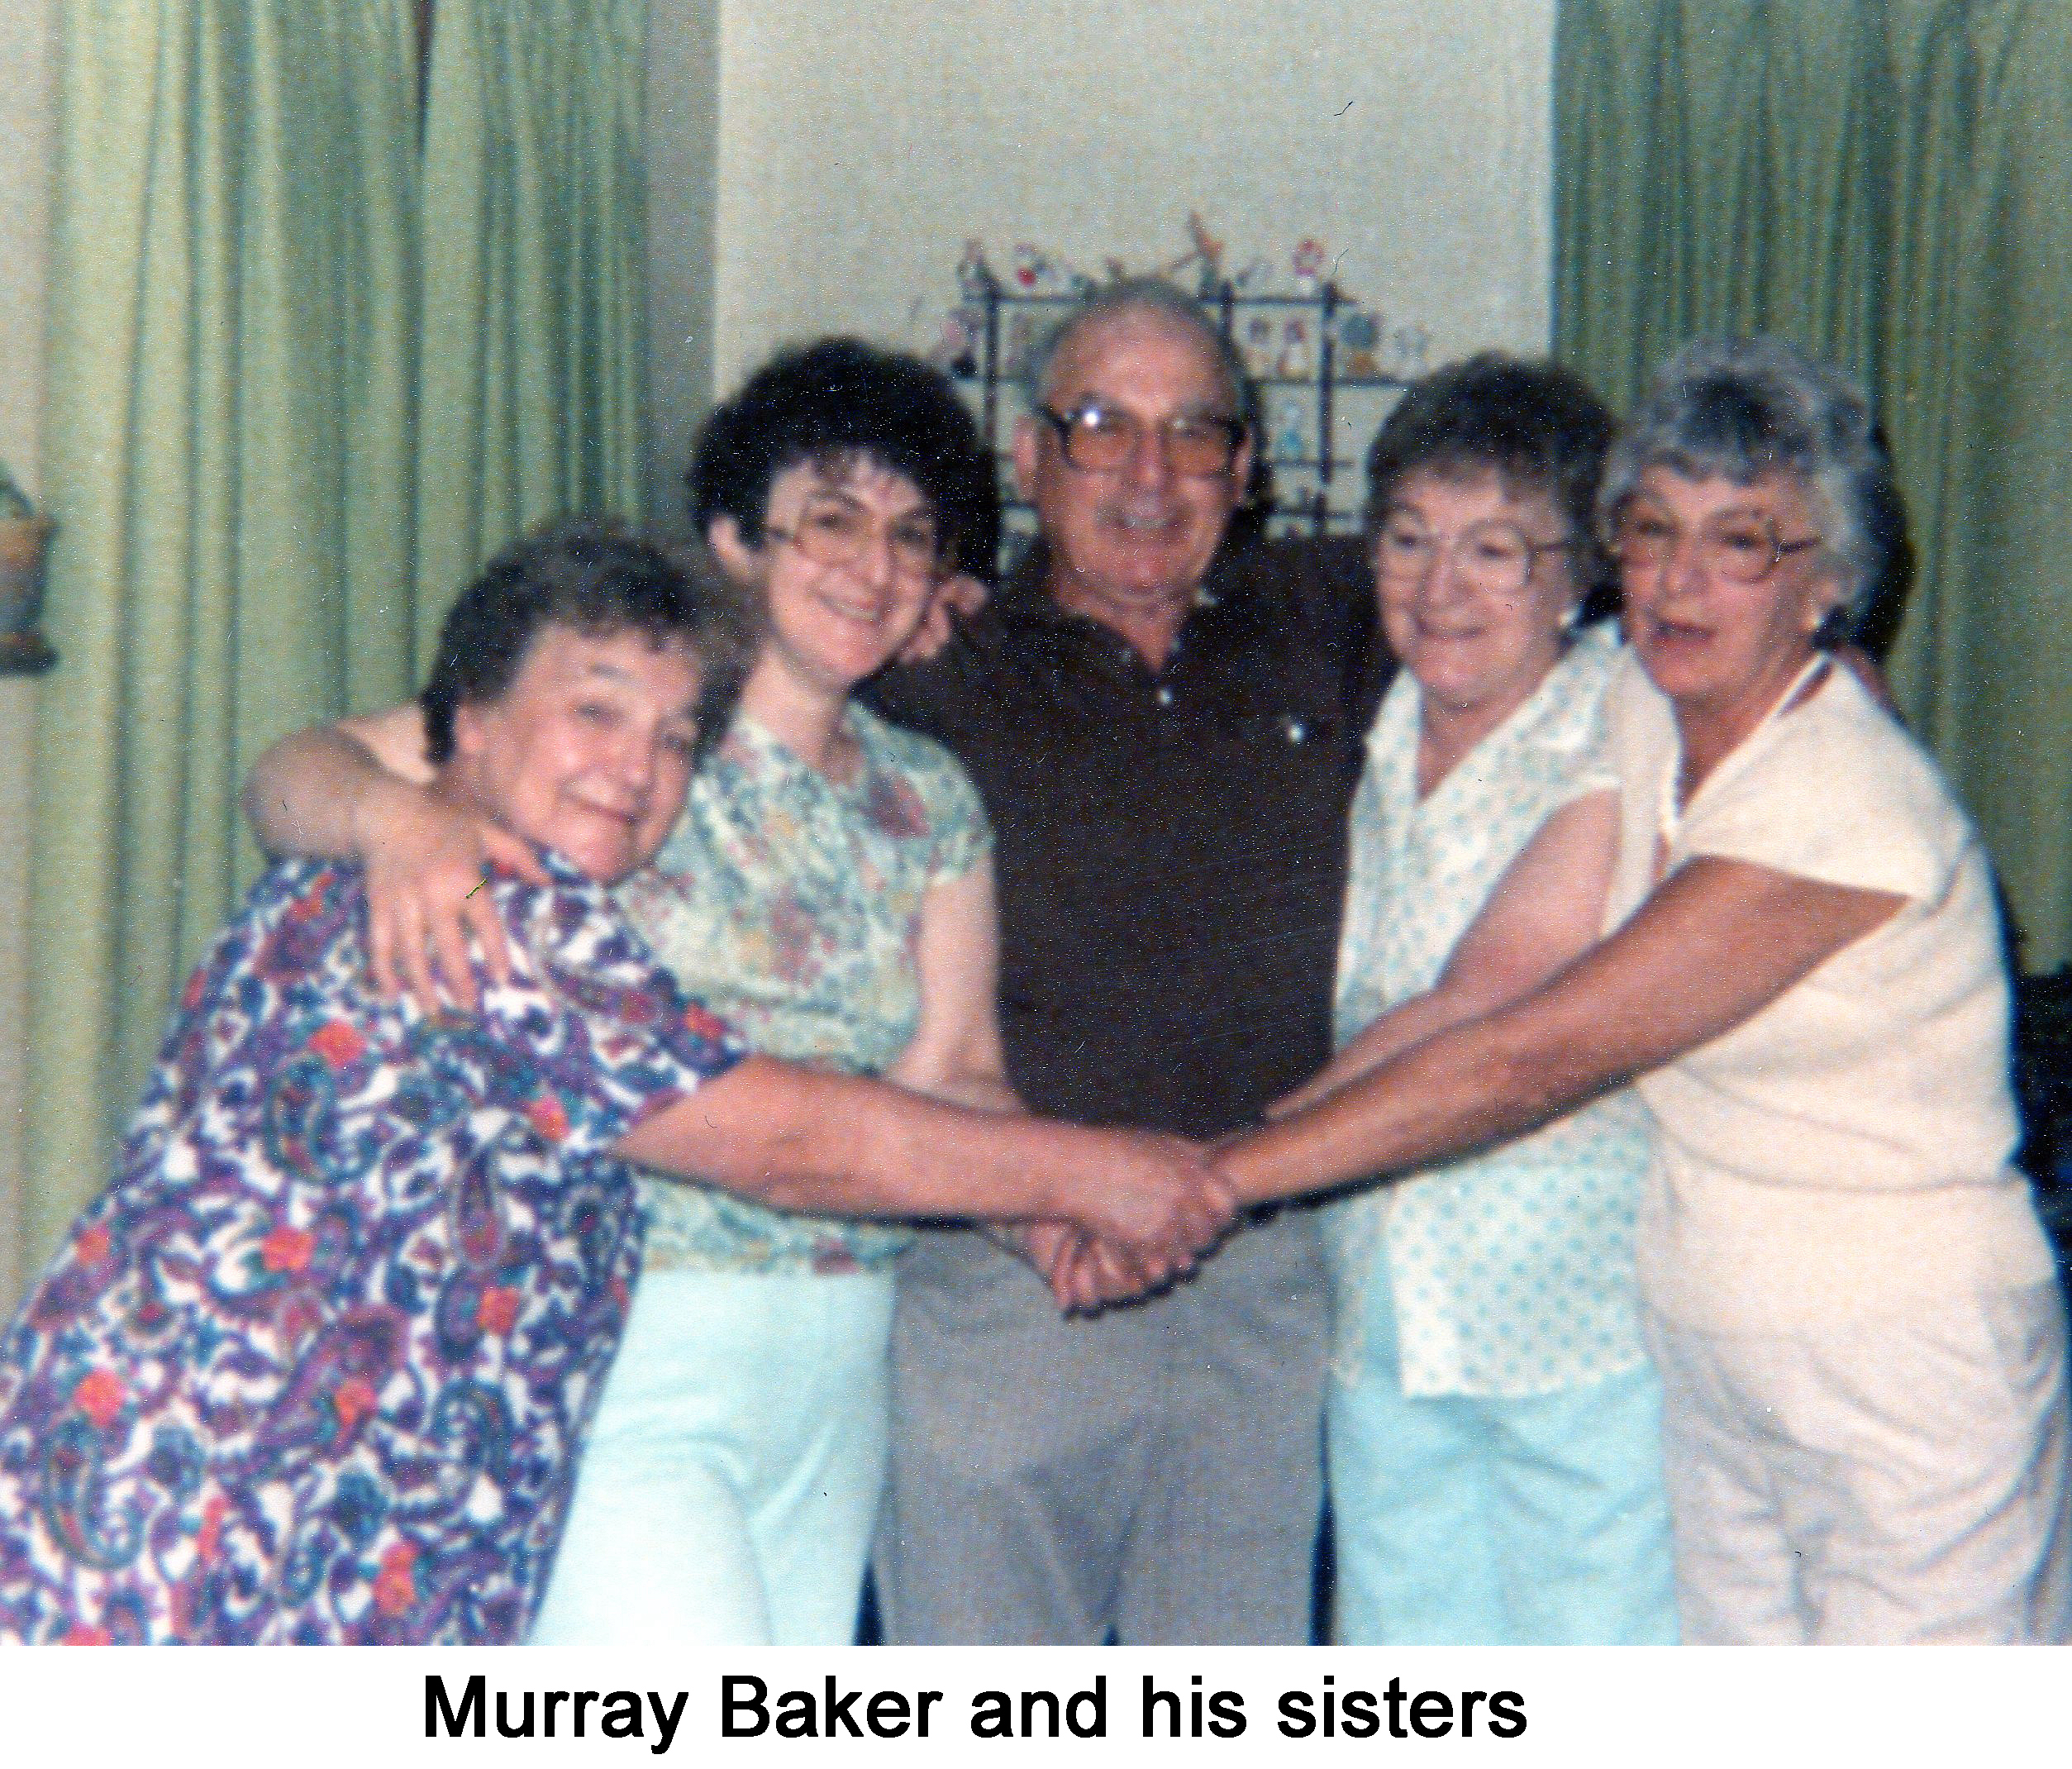 This photo was taken when the family was older. 
     Murray is standing in the middle with two sisters on either side. 
     The women are clasping hands.